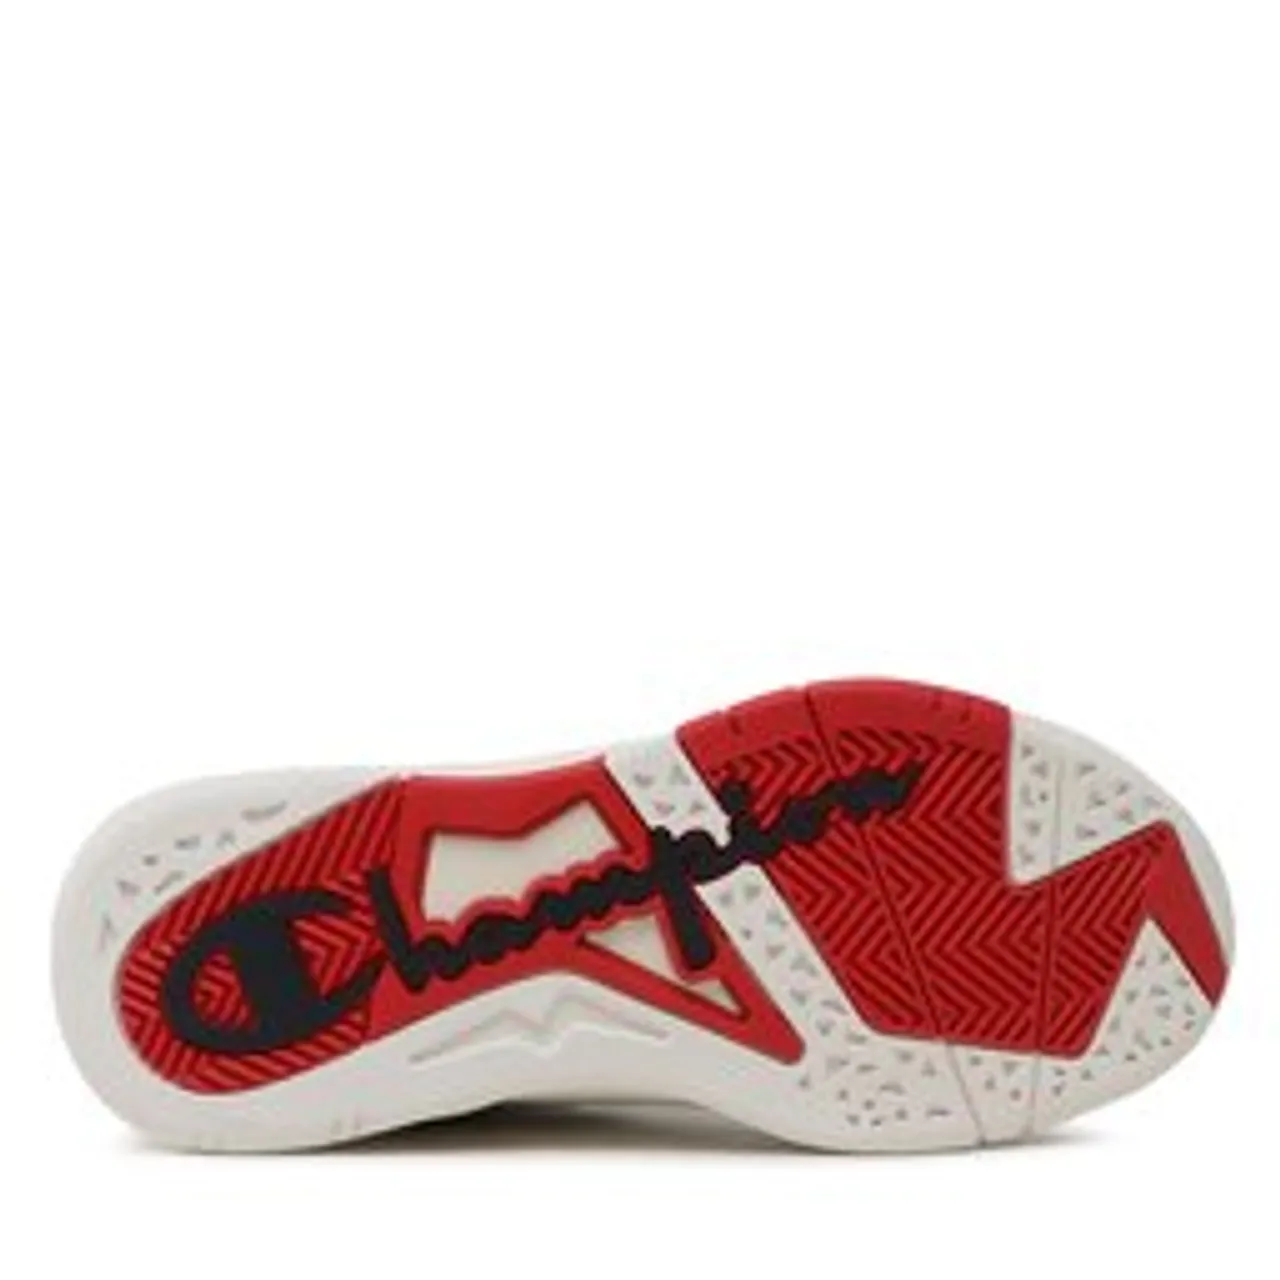 Sneakers Champion S21875-WW001 WHT/RBL/RED